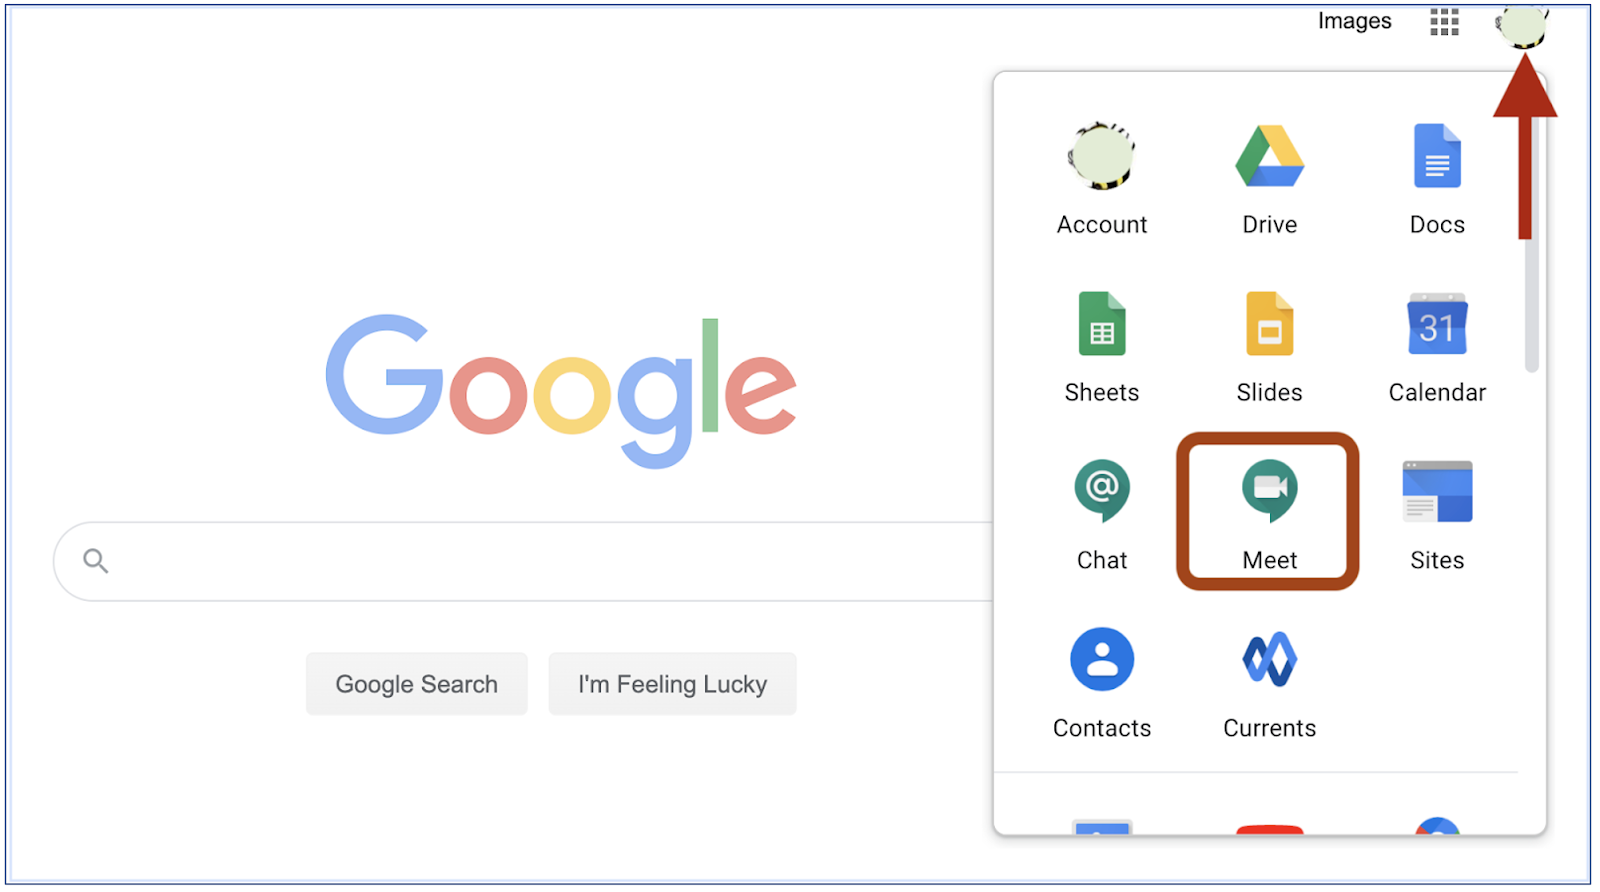 shows Google apps that appear when clicking on the "waffle" image next to your initial. Meet is highlighted.